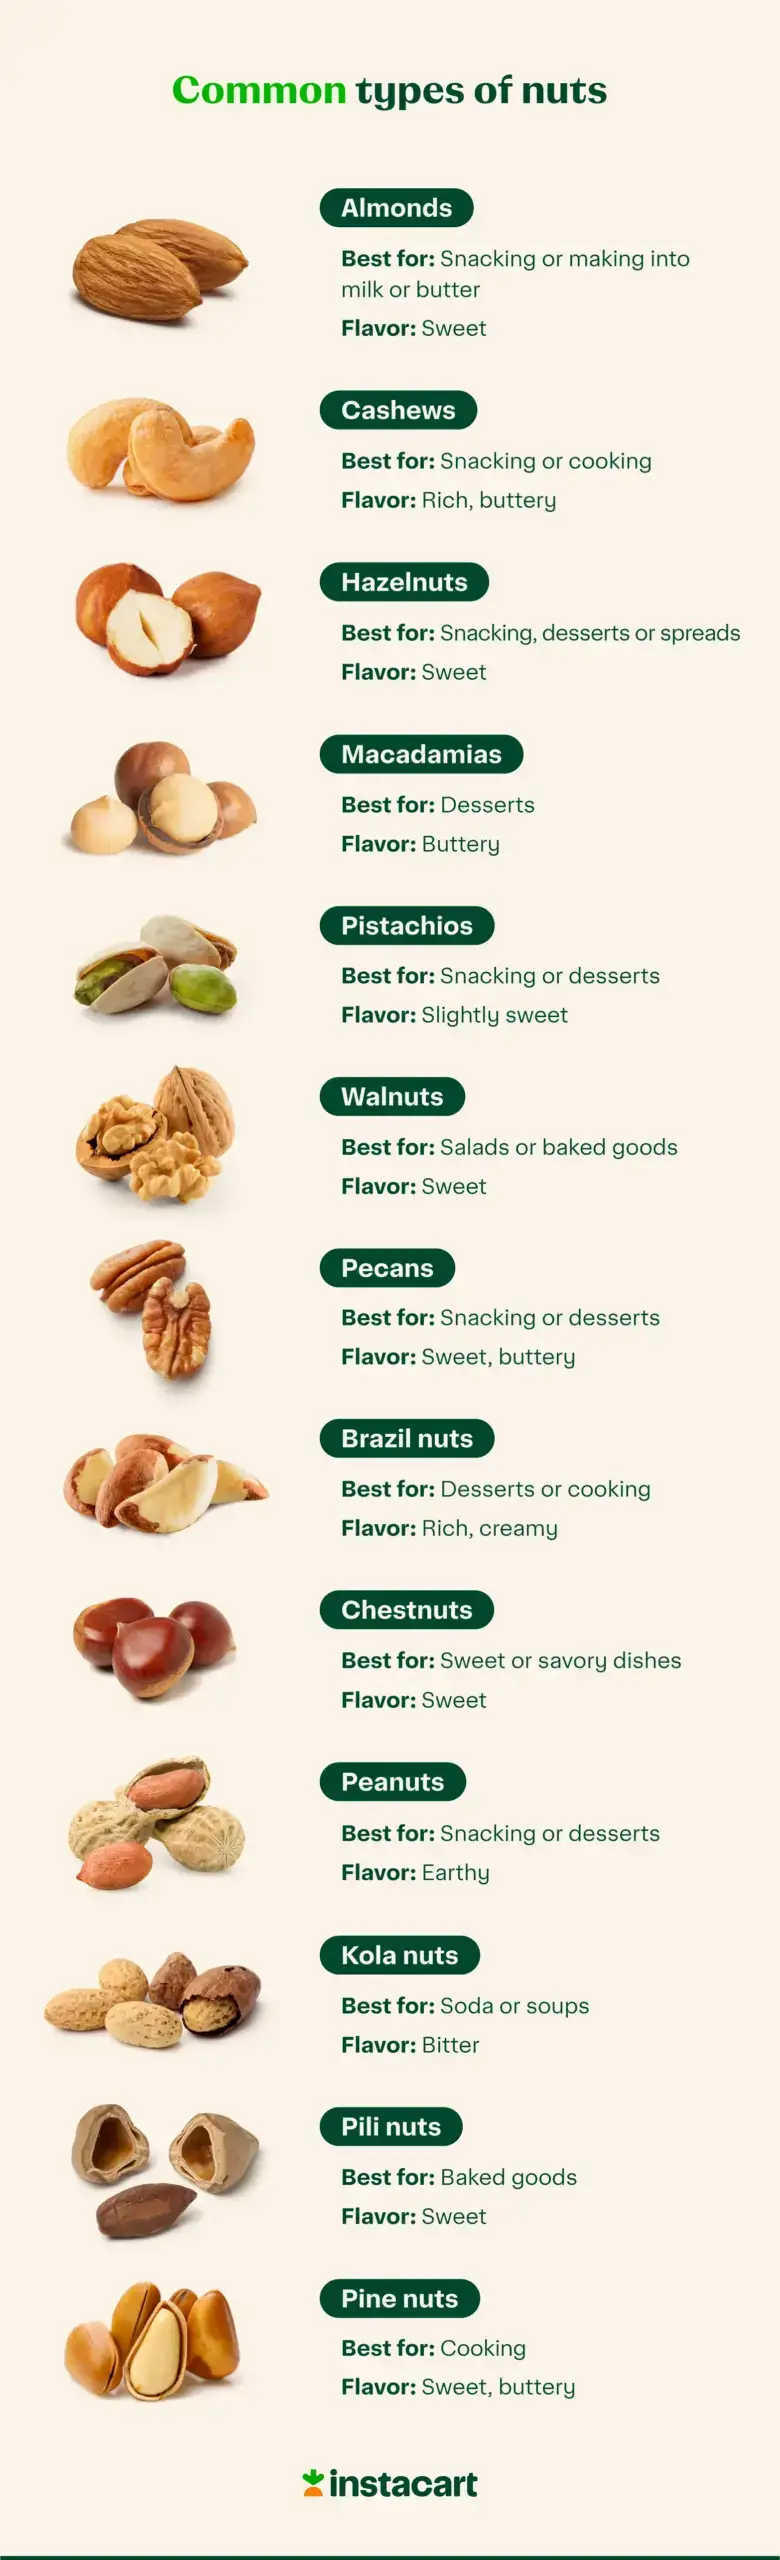 illustration of common types of nuts